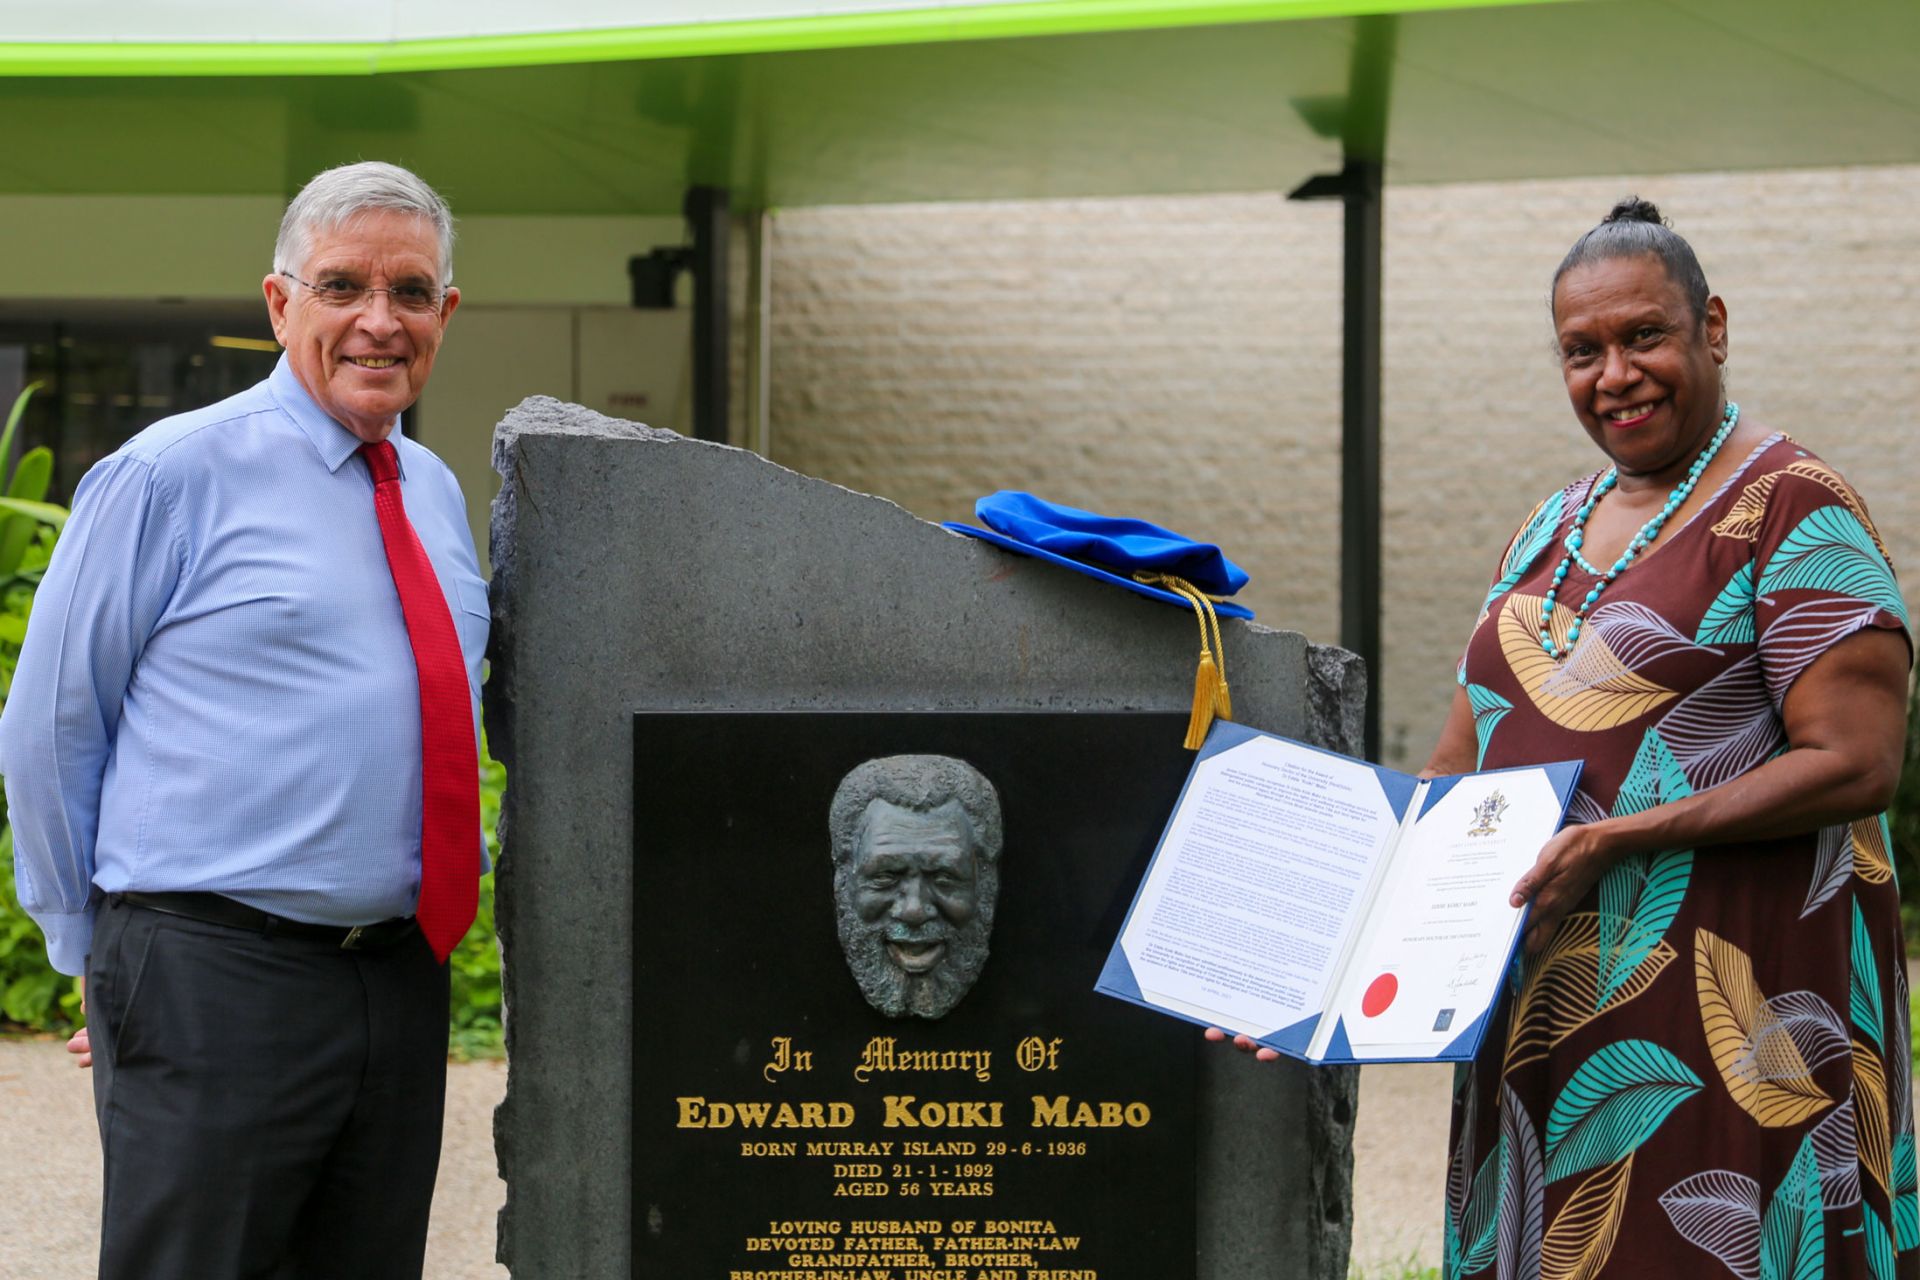 Chancellor Bill Tweddell and Gail Mabo stand on either side of a plaque commemorating Eddie. A PhD bonnet is on top of the plaque and Gail holds open a blue folder showing the testator